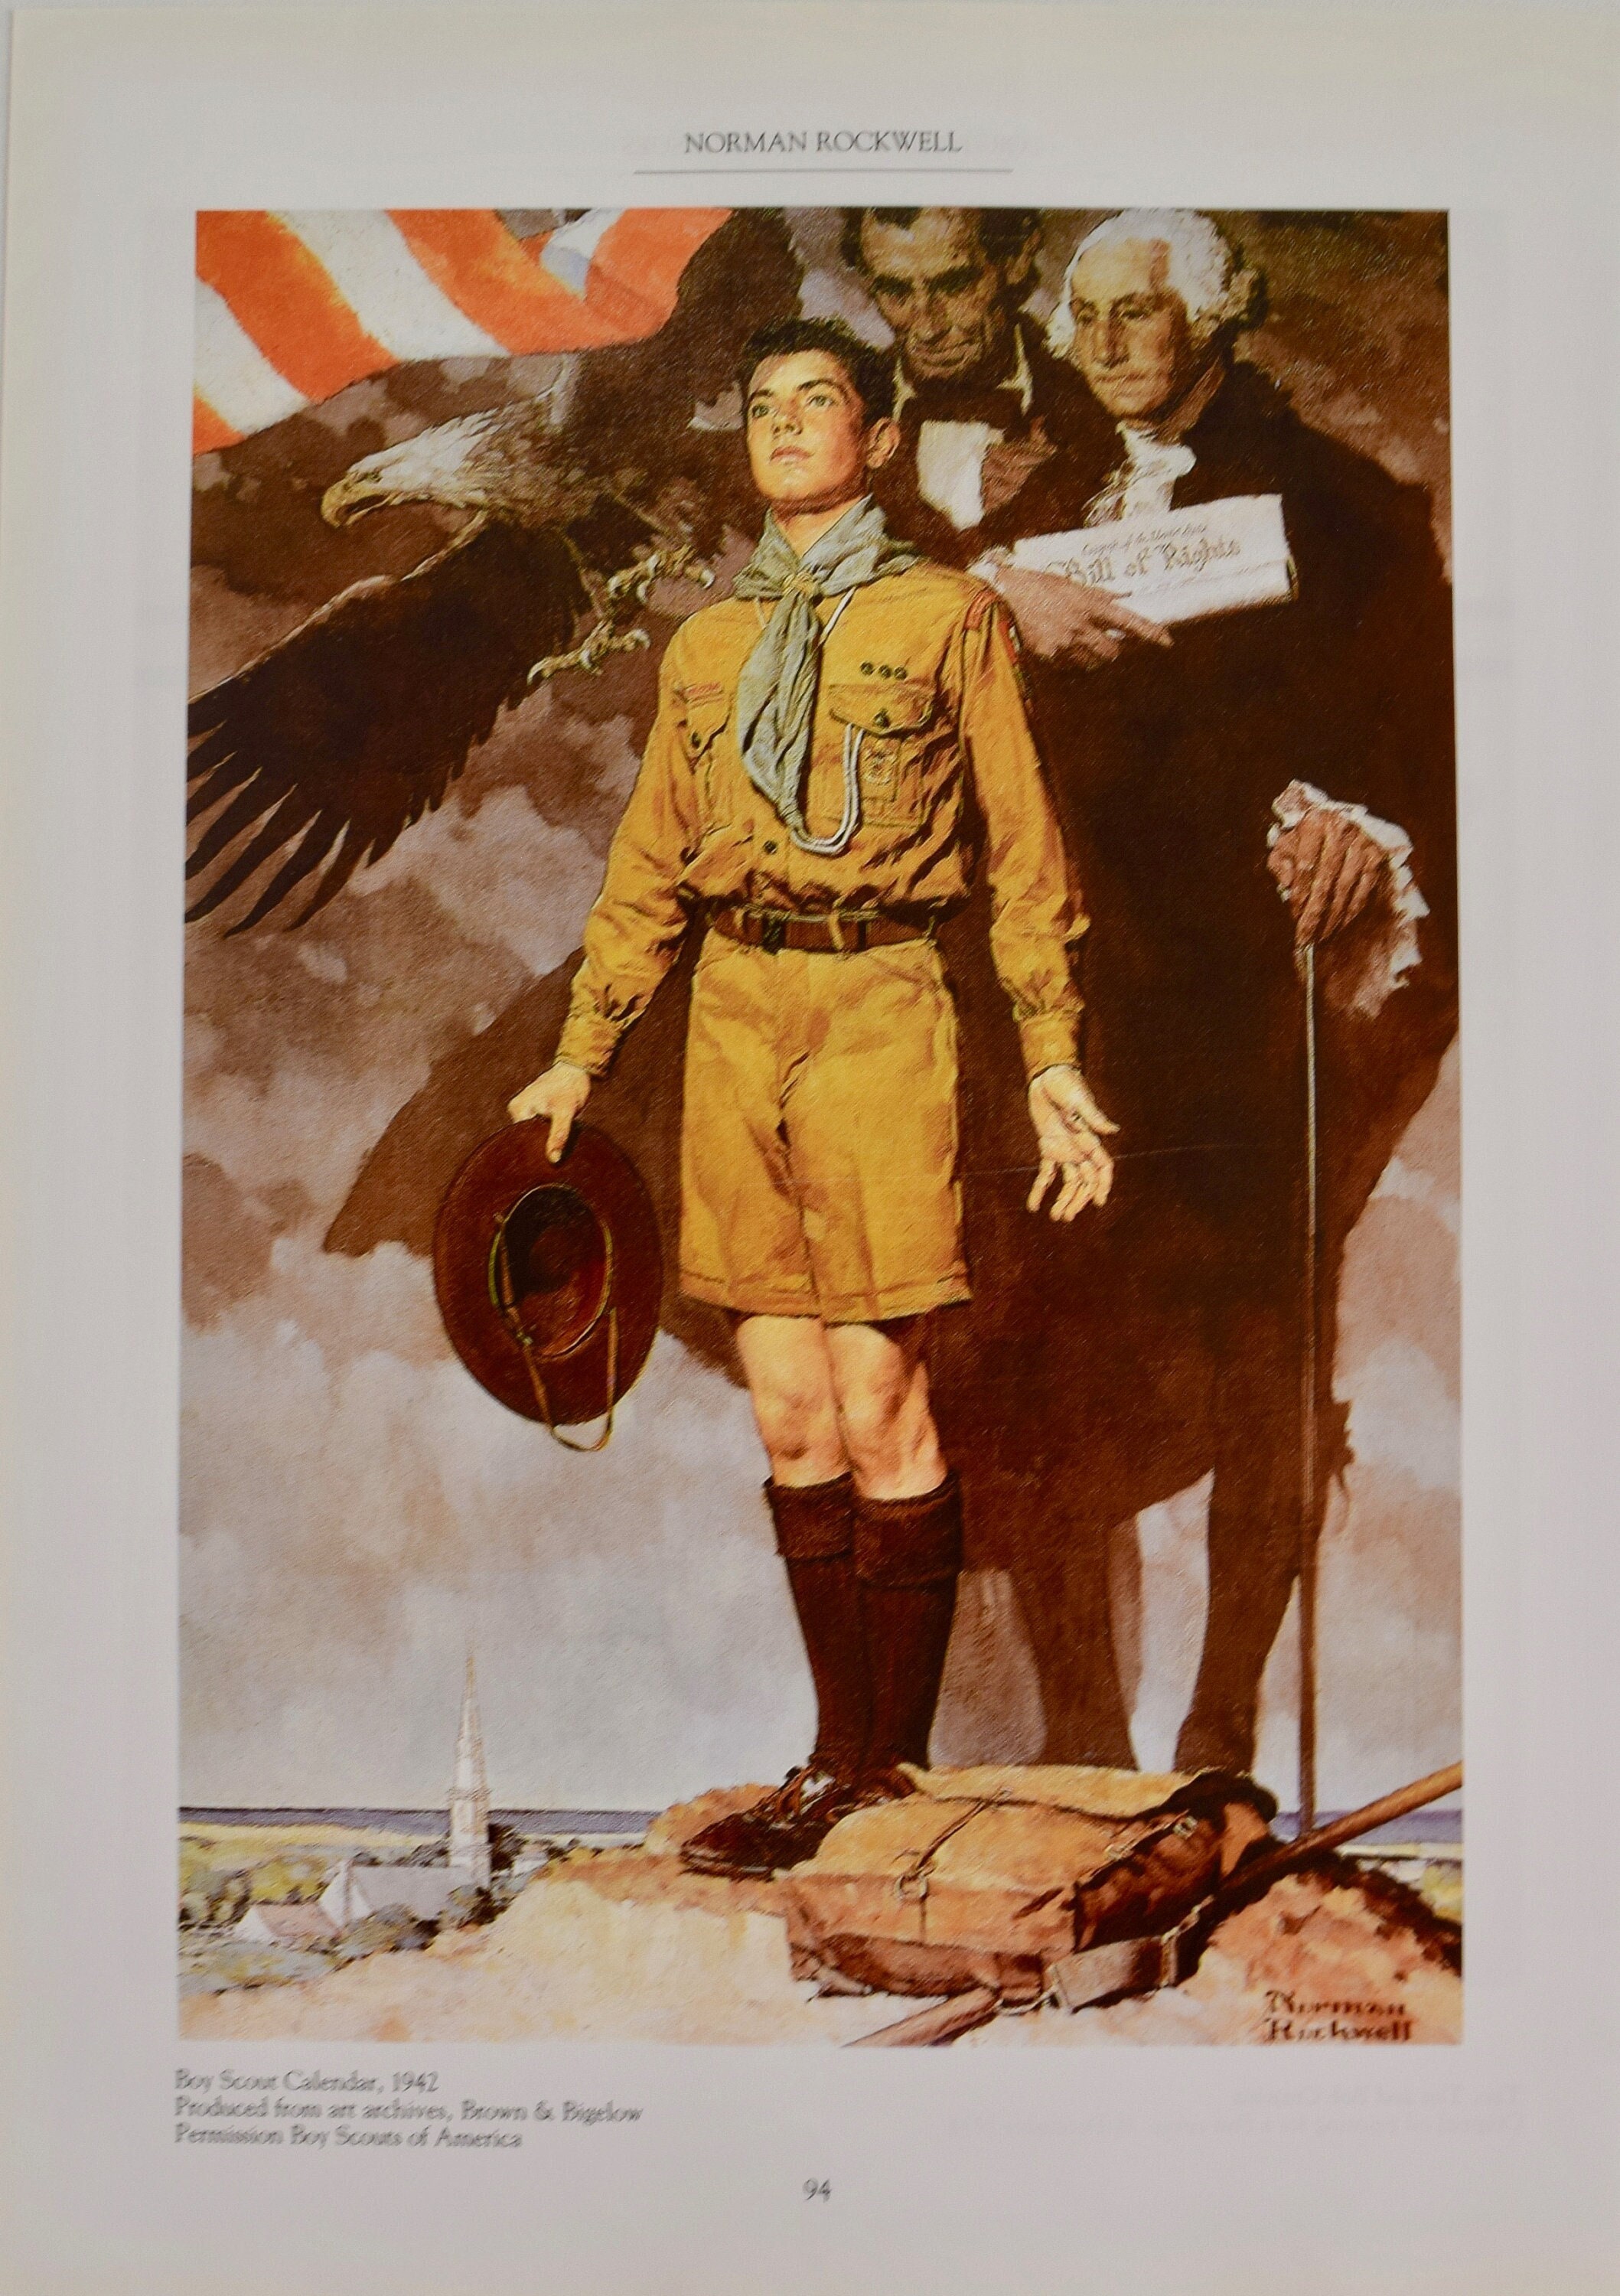 How Norman Rockwell's Boy Scout Paintings Ended Up in Ohio